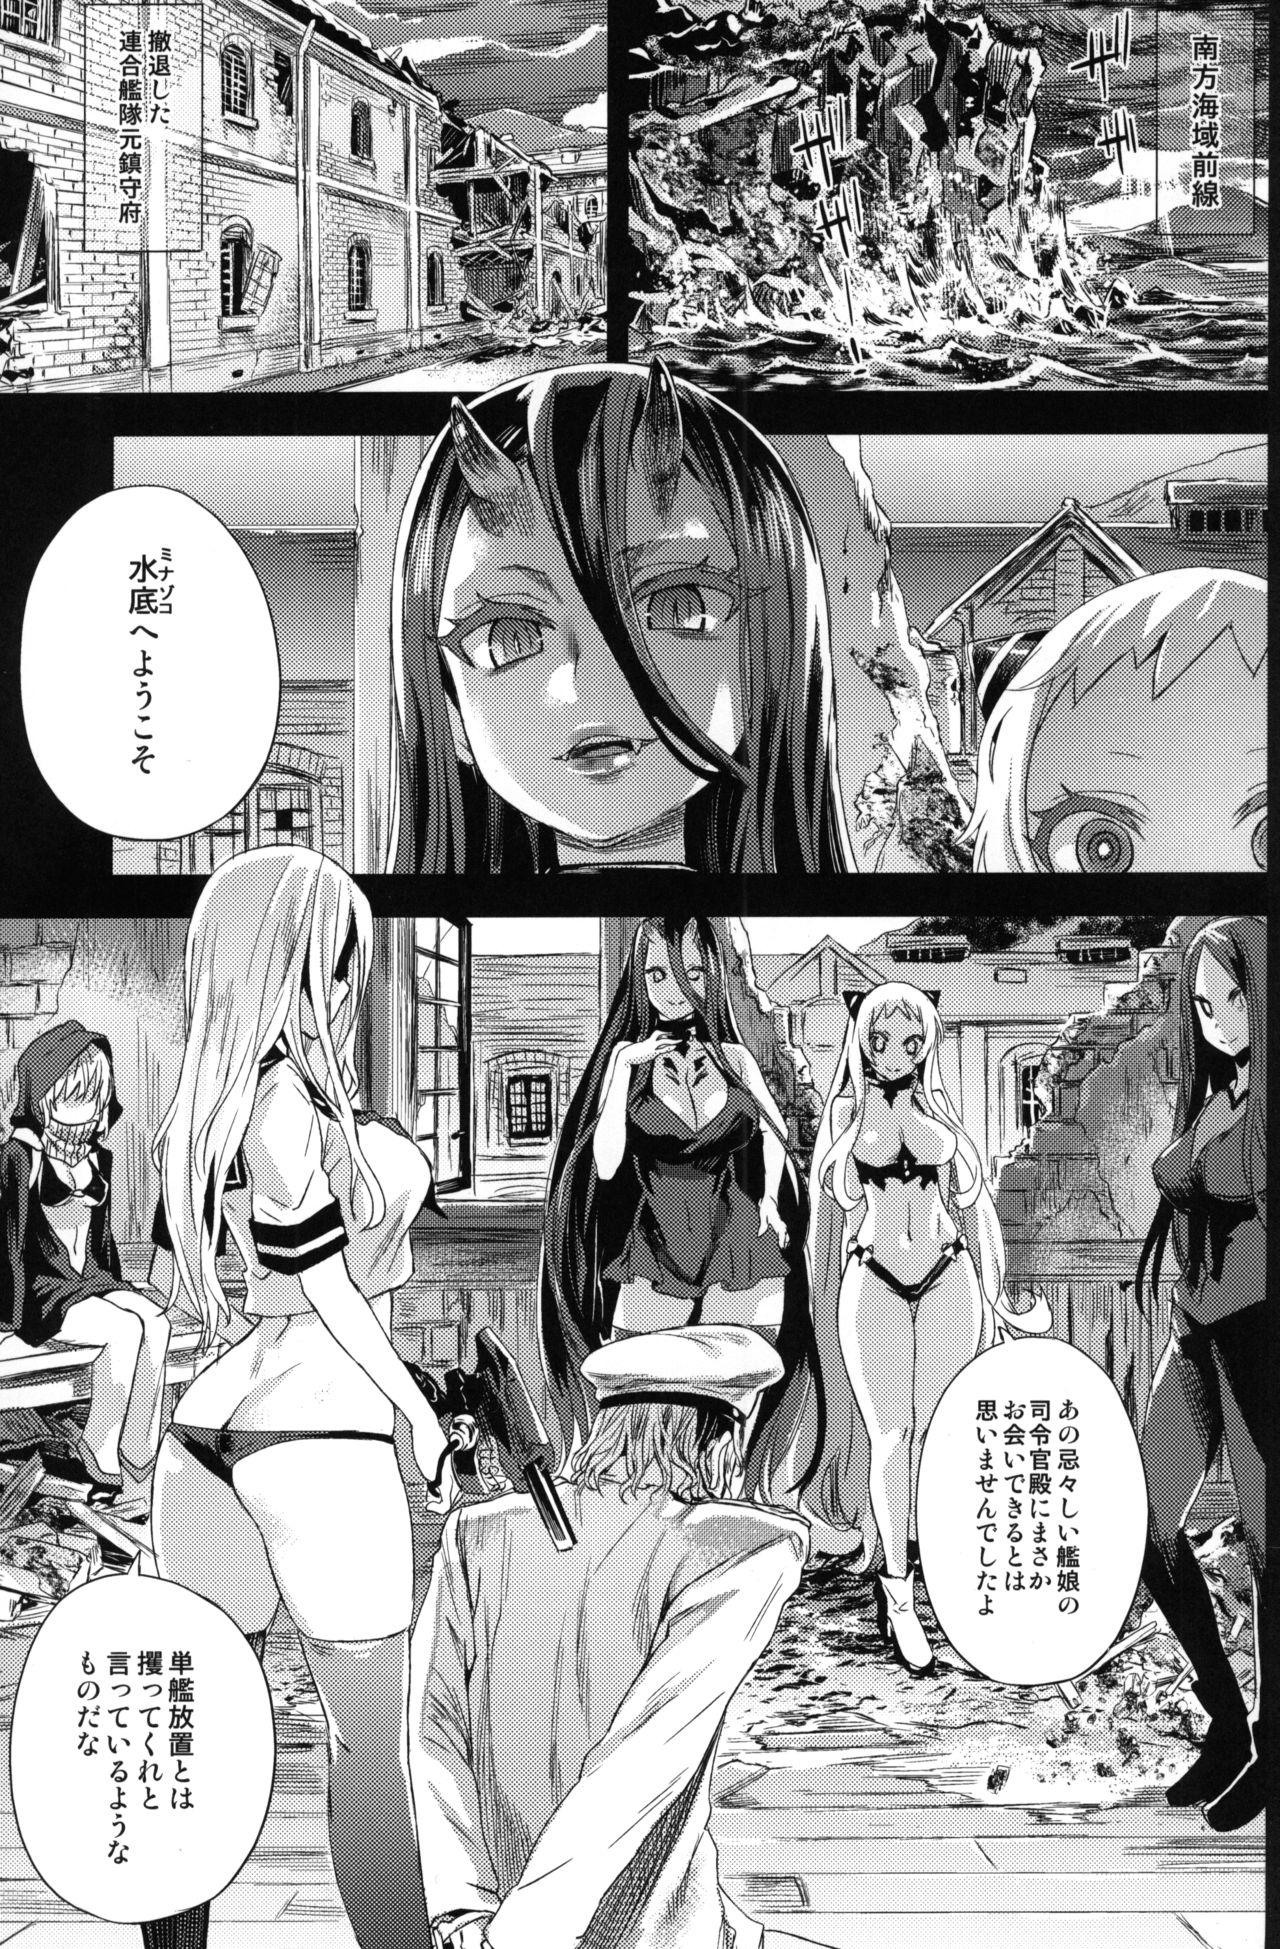 Masseuse VictimGirls 17 SOS - Kantai collection Massages - Page 2